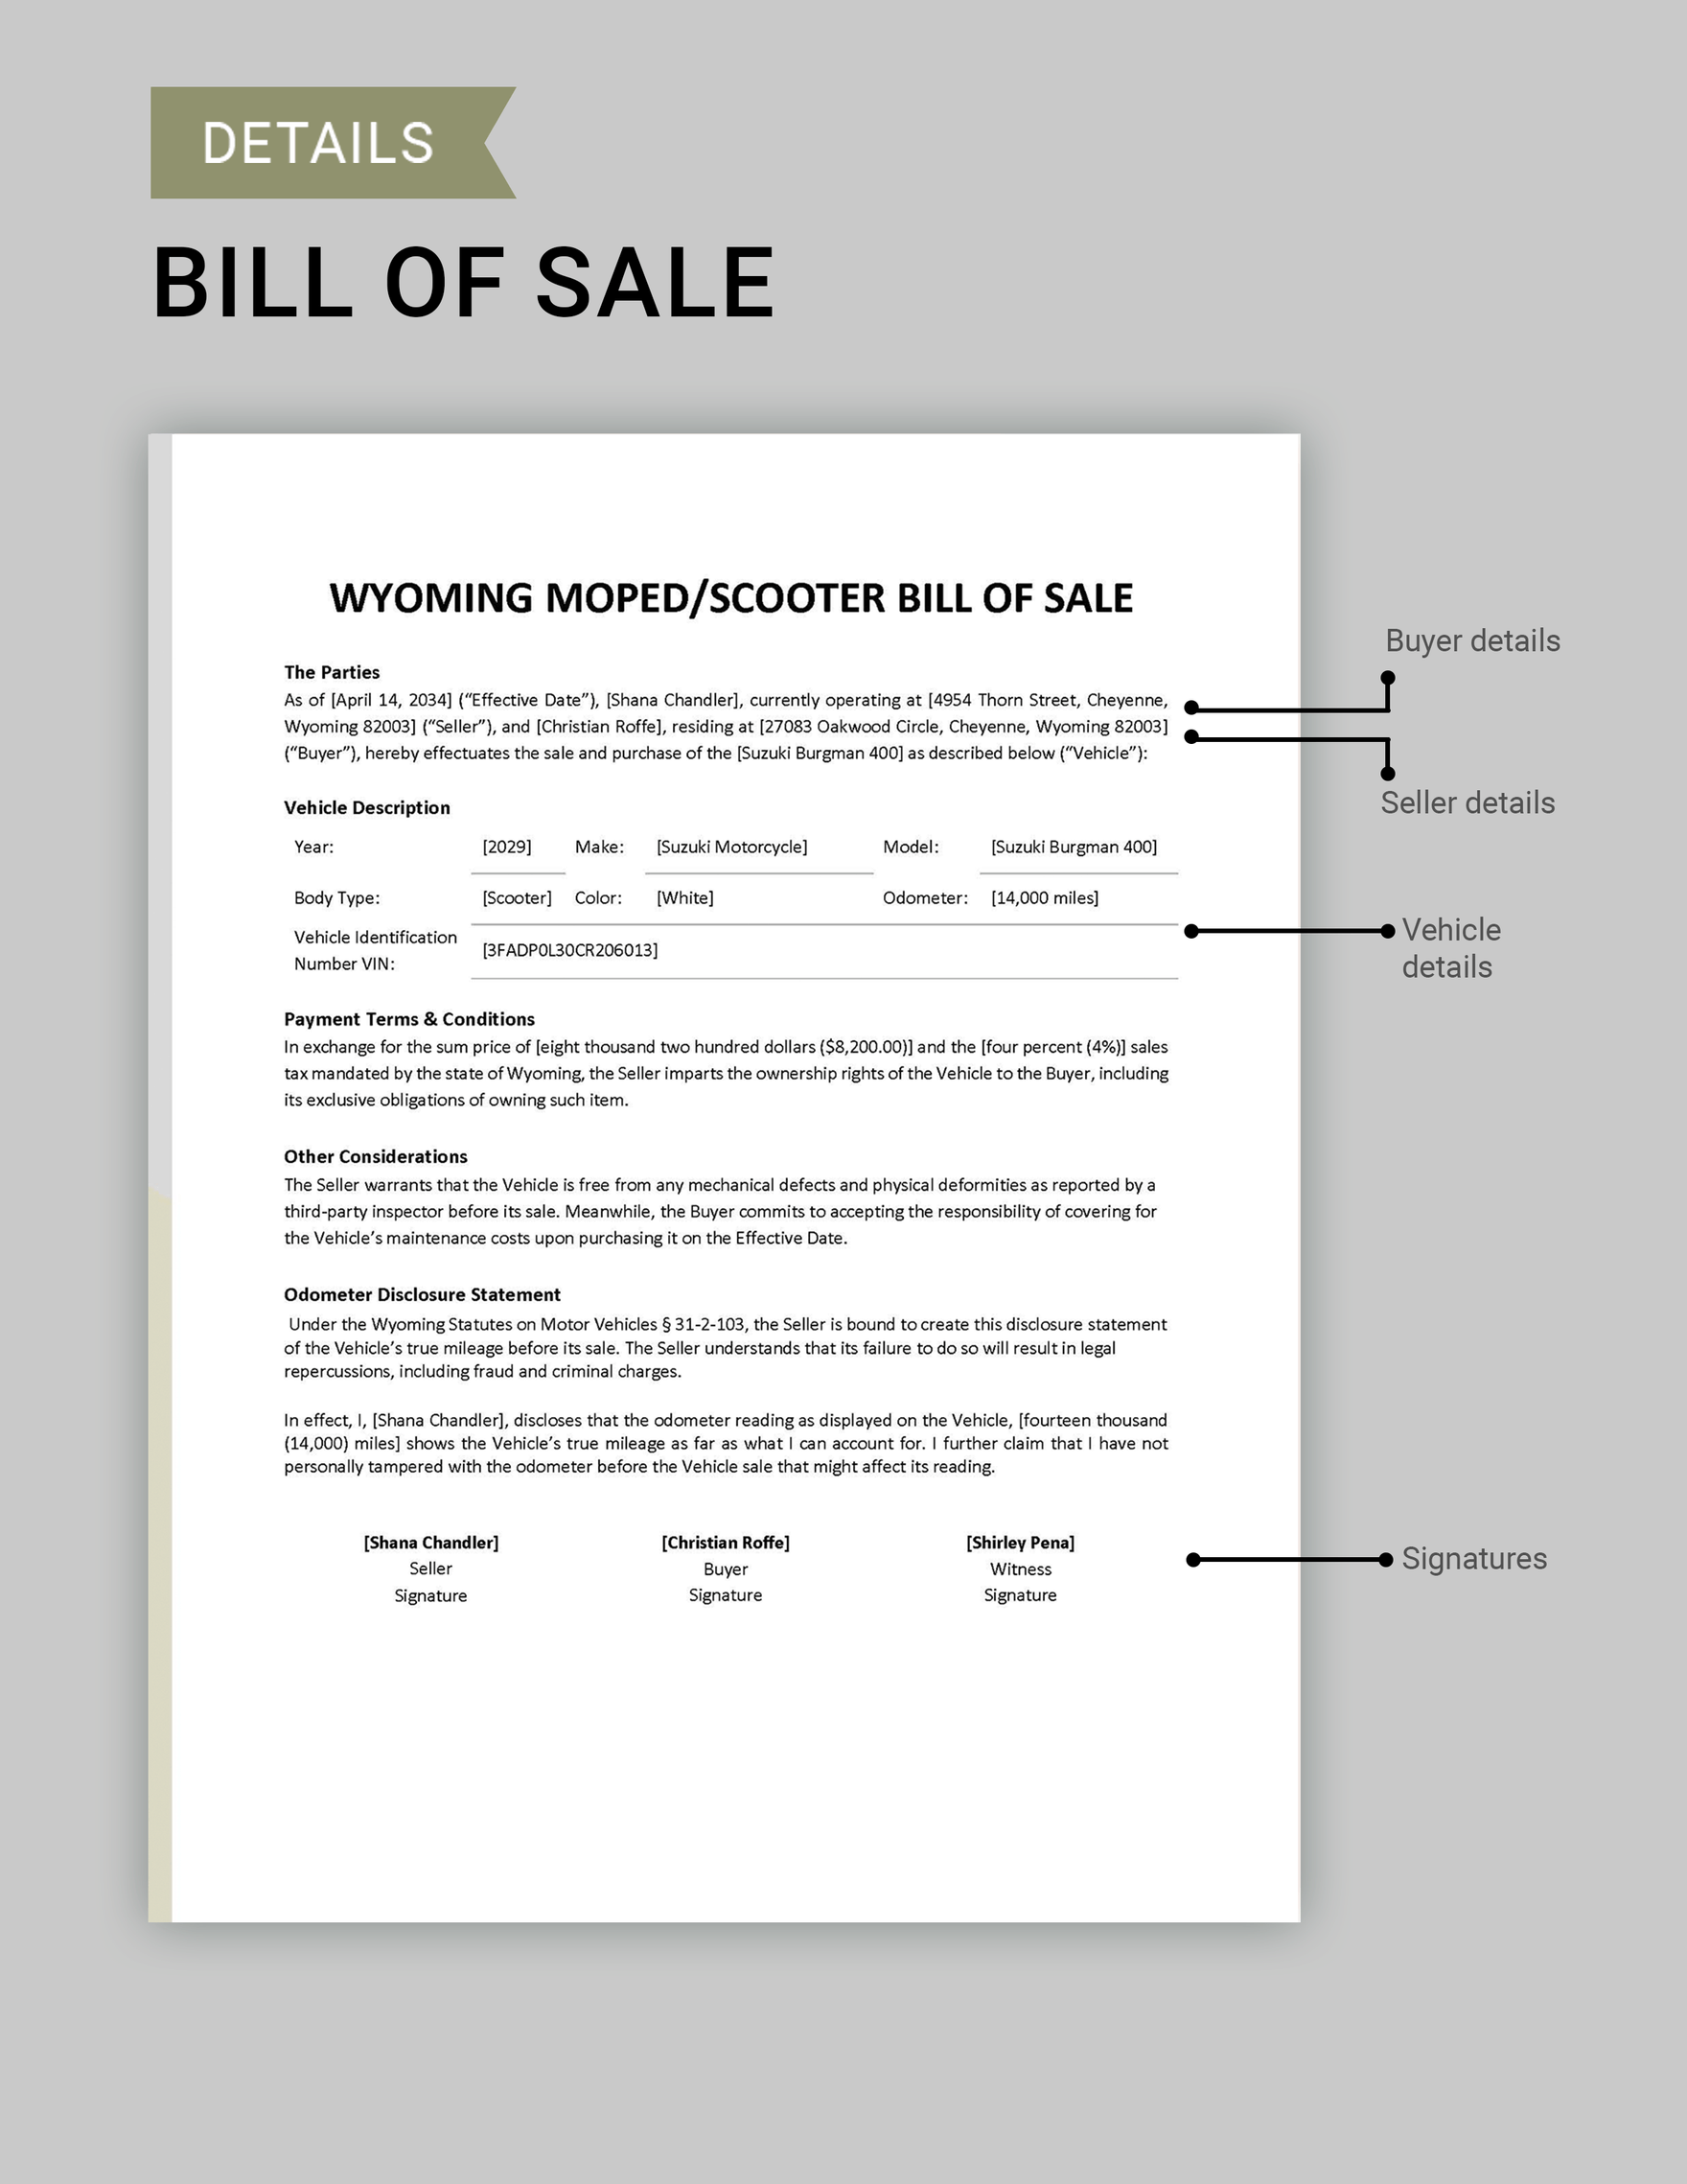 Wyoming Moped / Scooter Bill of Sale Form Template